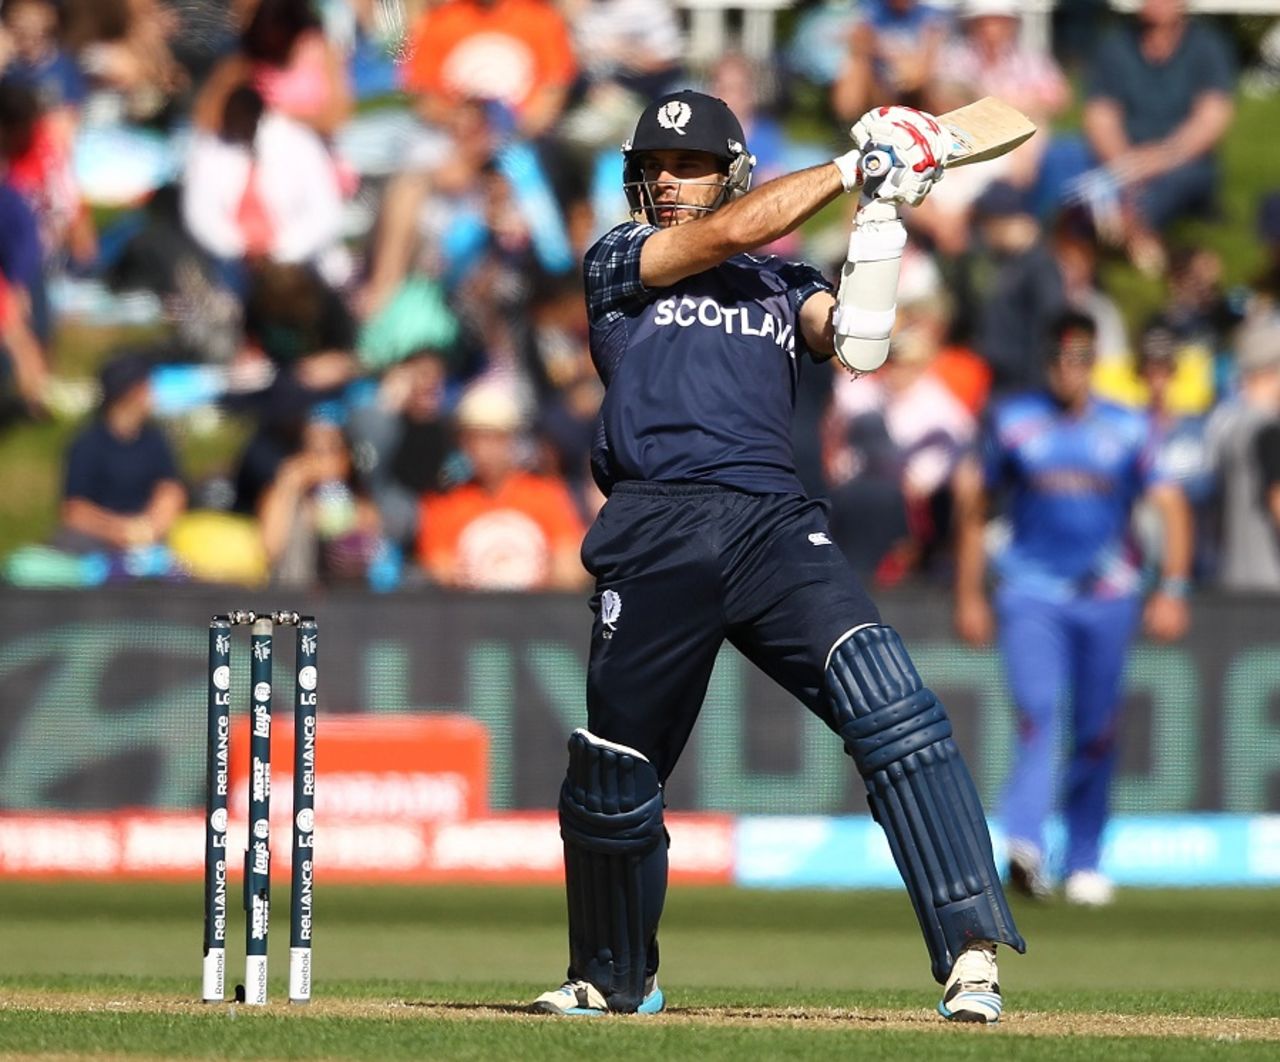 Kyle Coetzer flays the ball through the off side, Afghanistan v Scotland, World Cup 2015, Group A, Dunedin, February 26, 2015